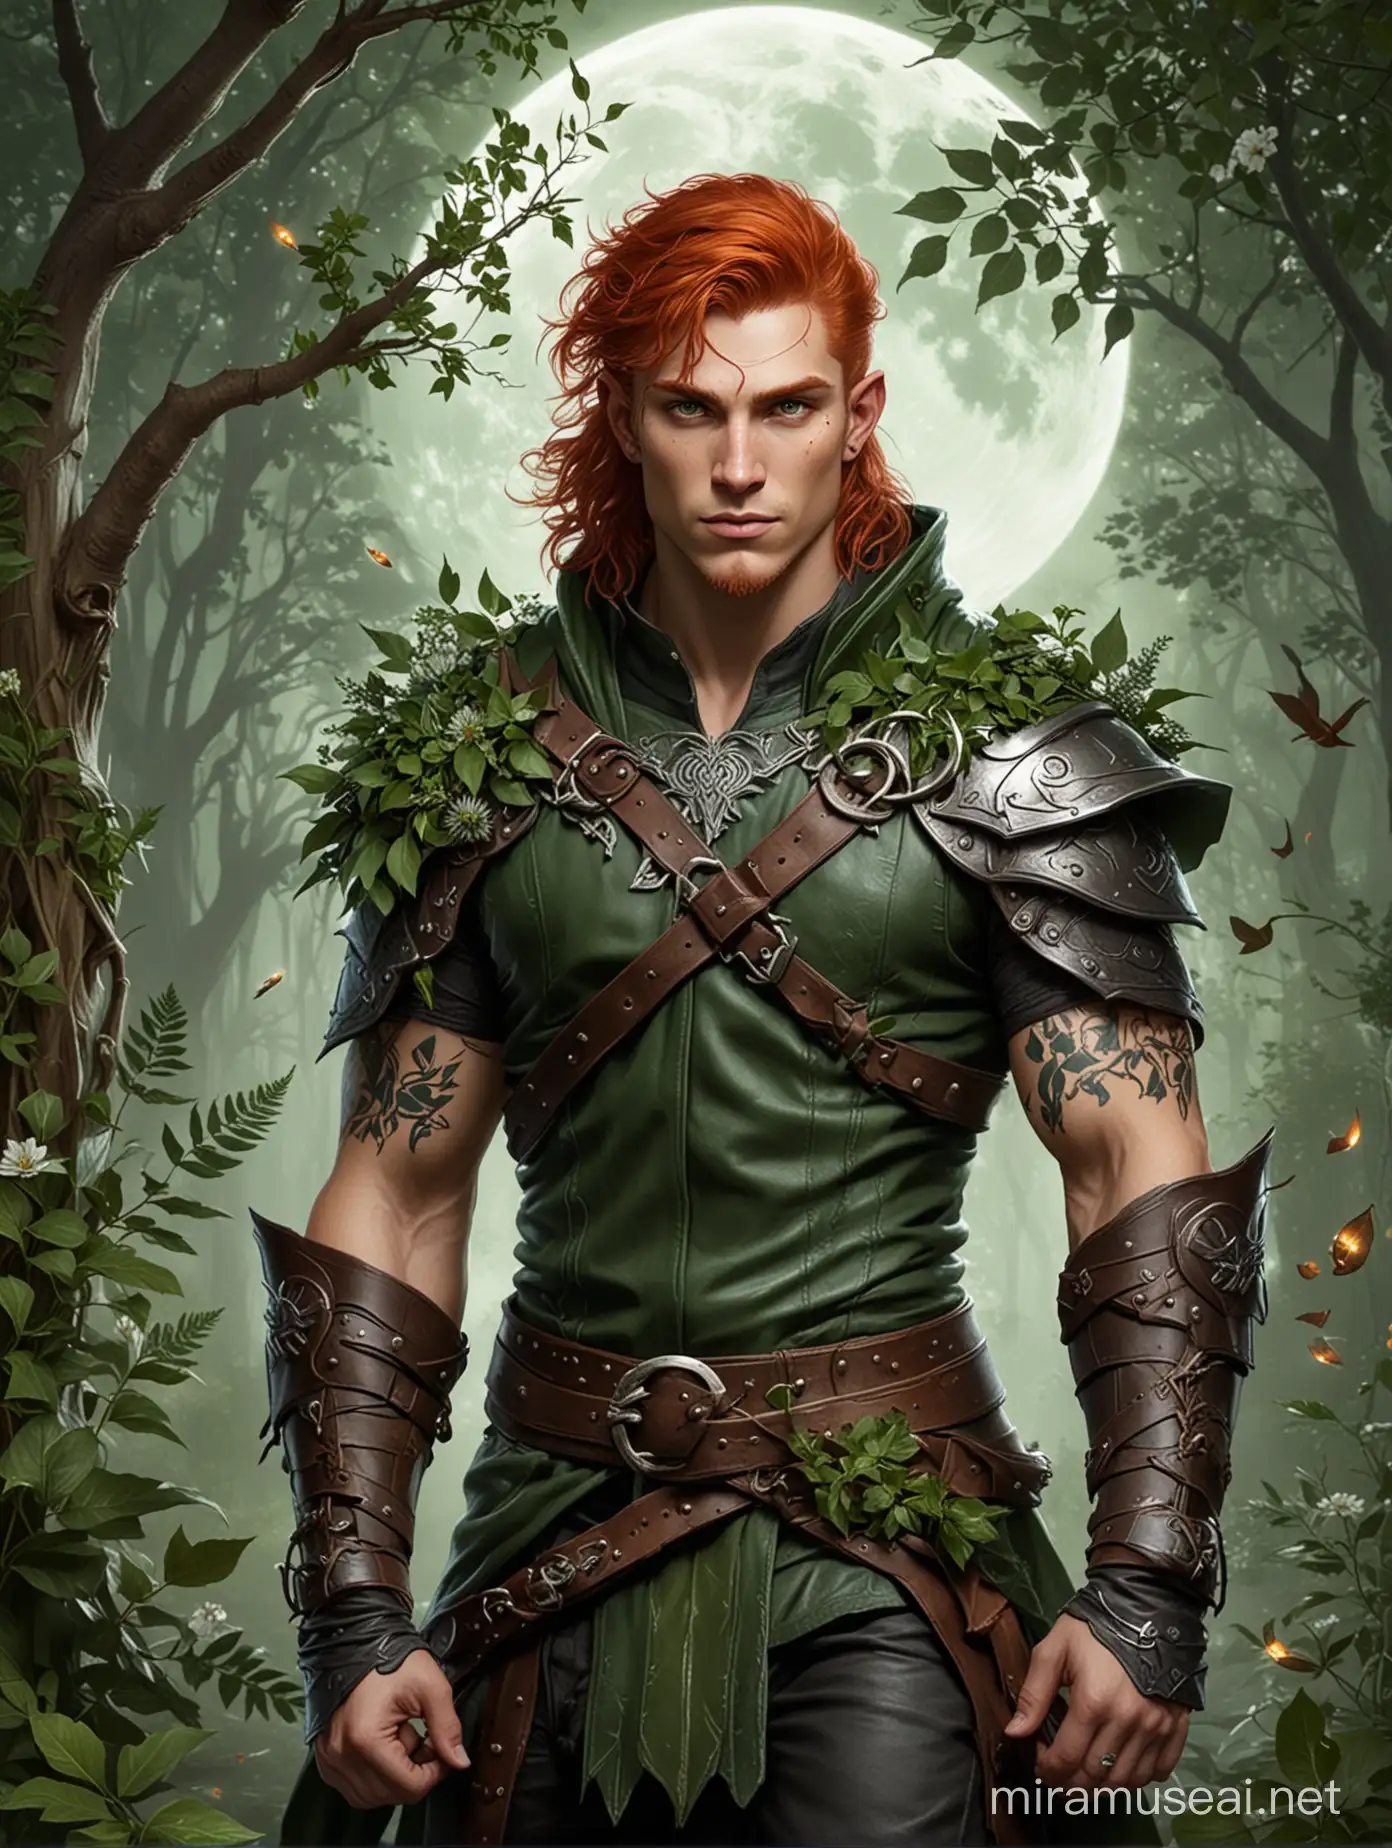 Create a male human Dungeons and Dragons character. He will be a druid, redheaded with green eyes. Their leather garments are adorned with leaves, branches and flowers. He has a tattoo of a crescent moon on his right arm.